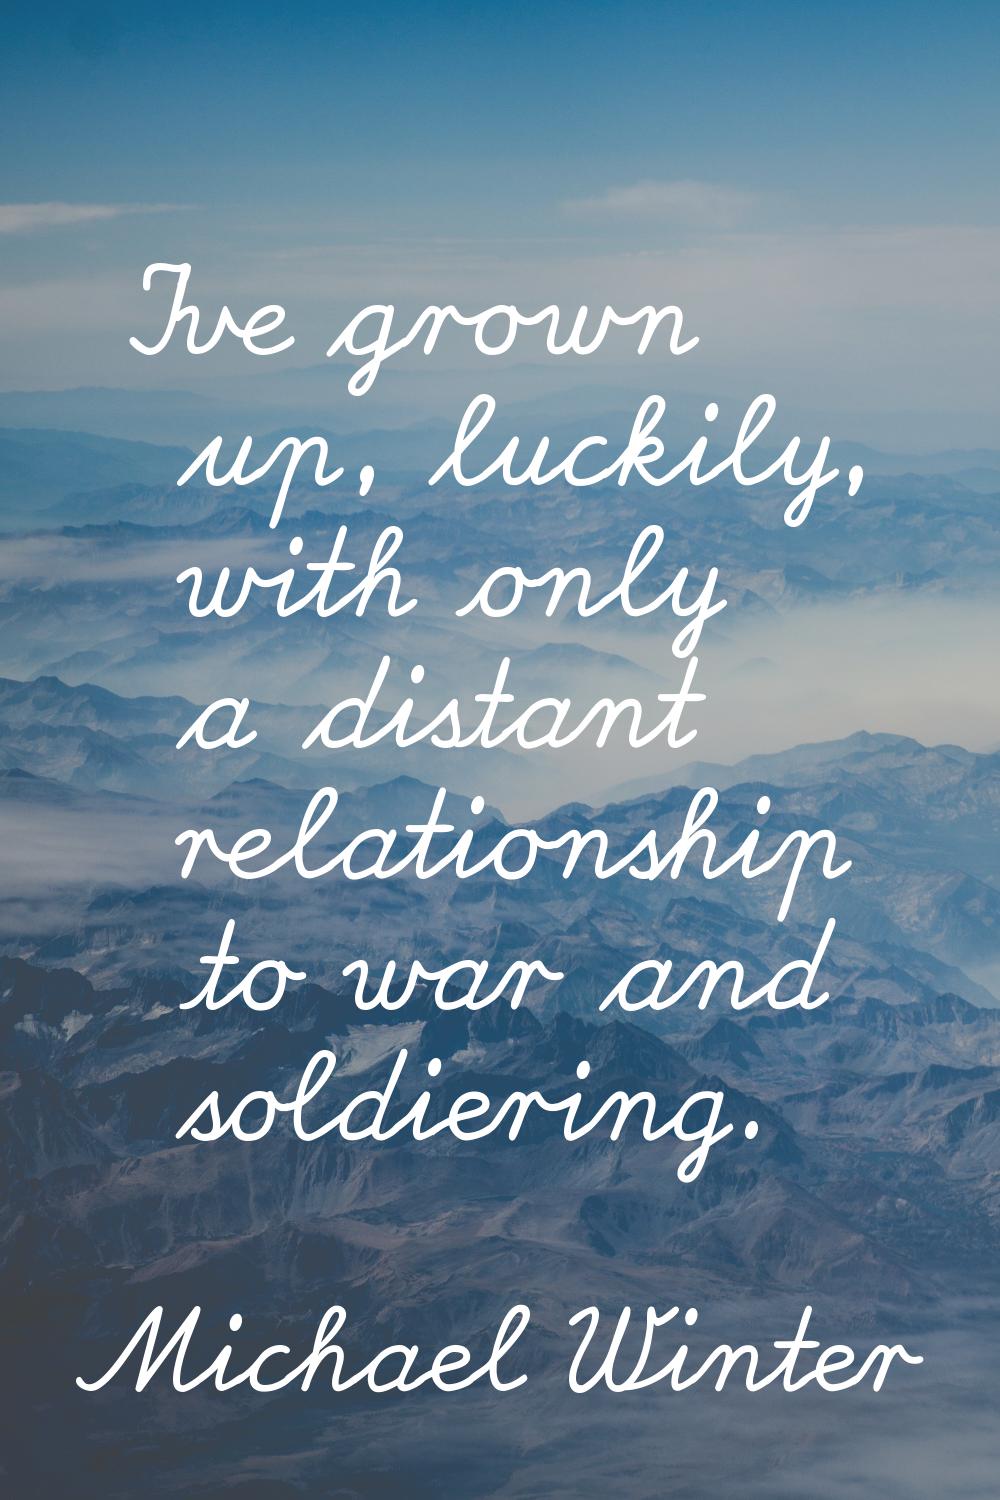 I've grown up, luckily, with only a distant relationship to war and soldiering.